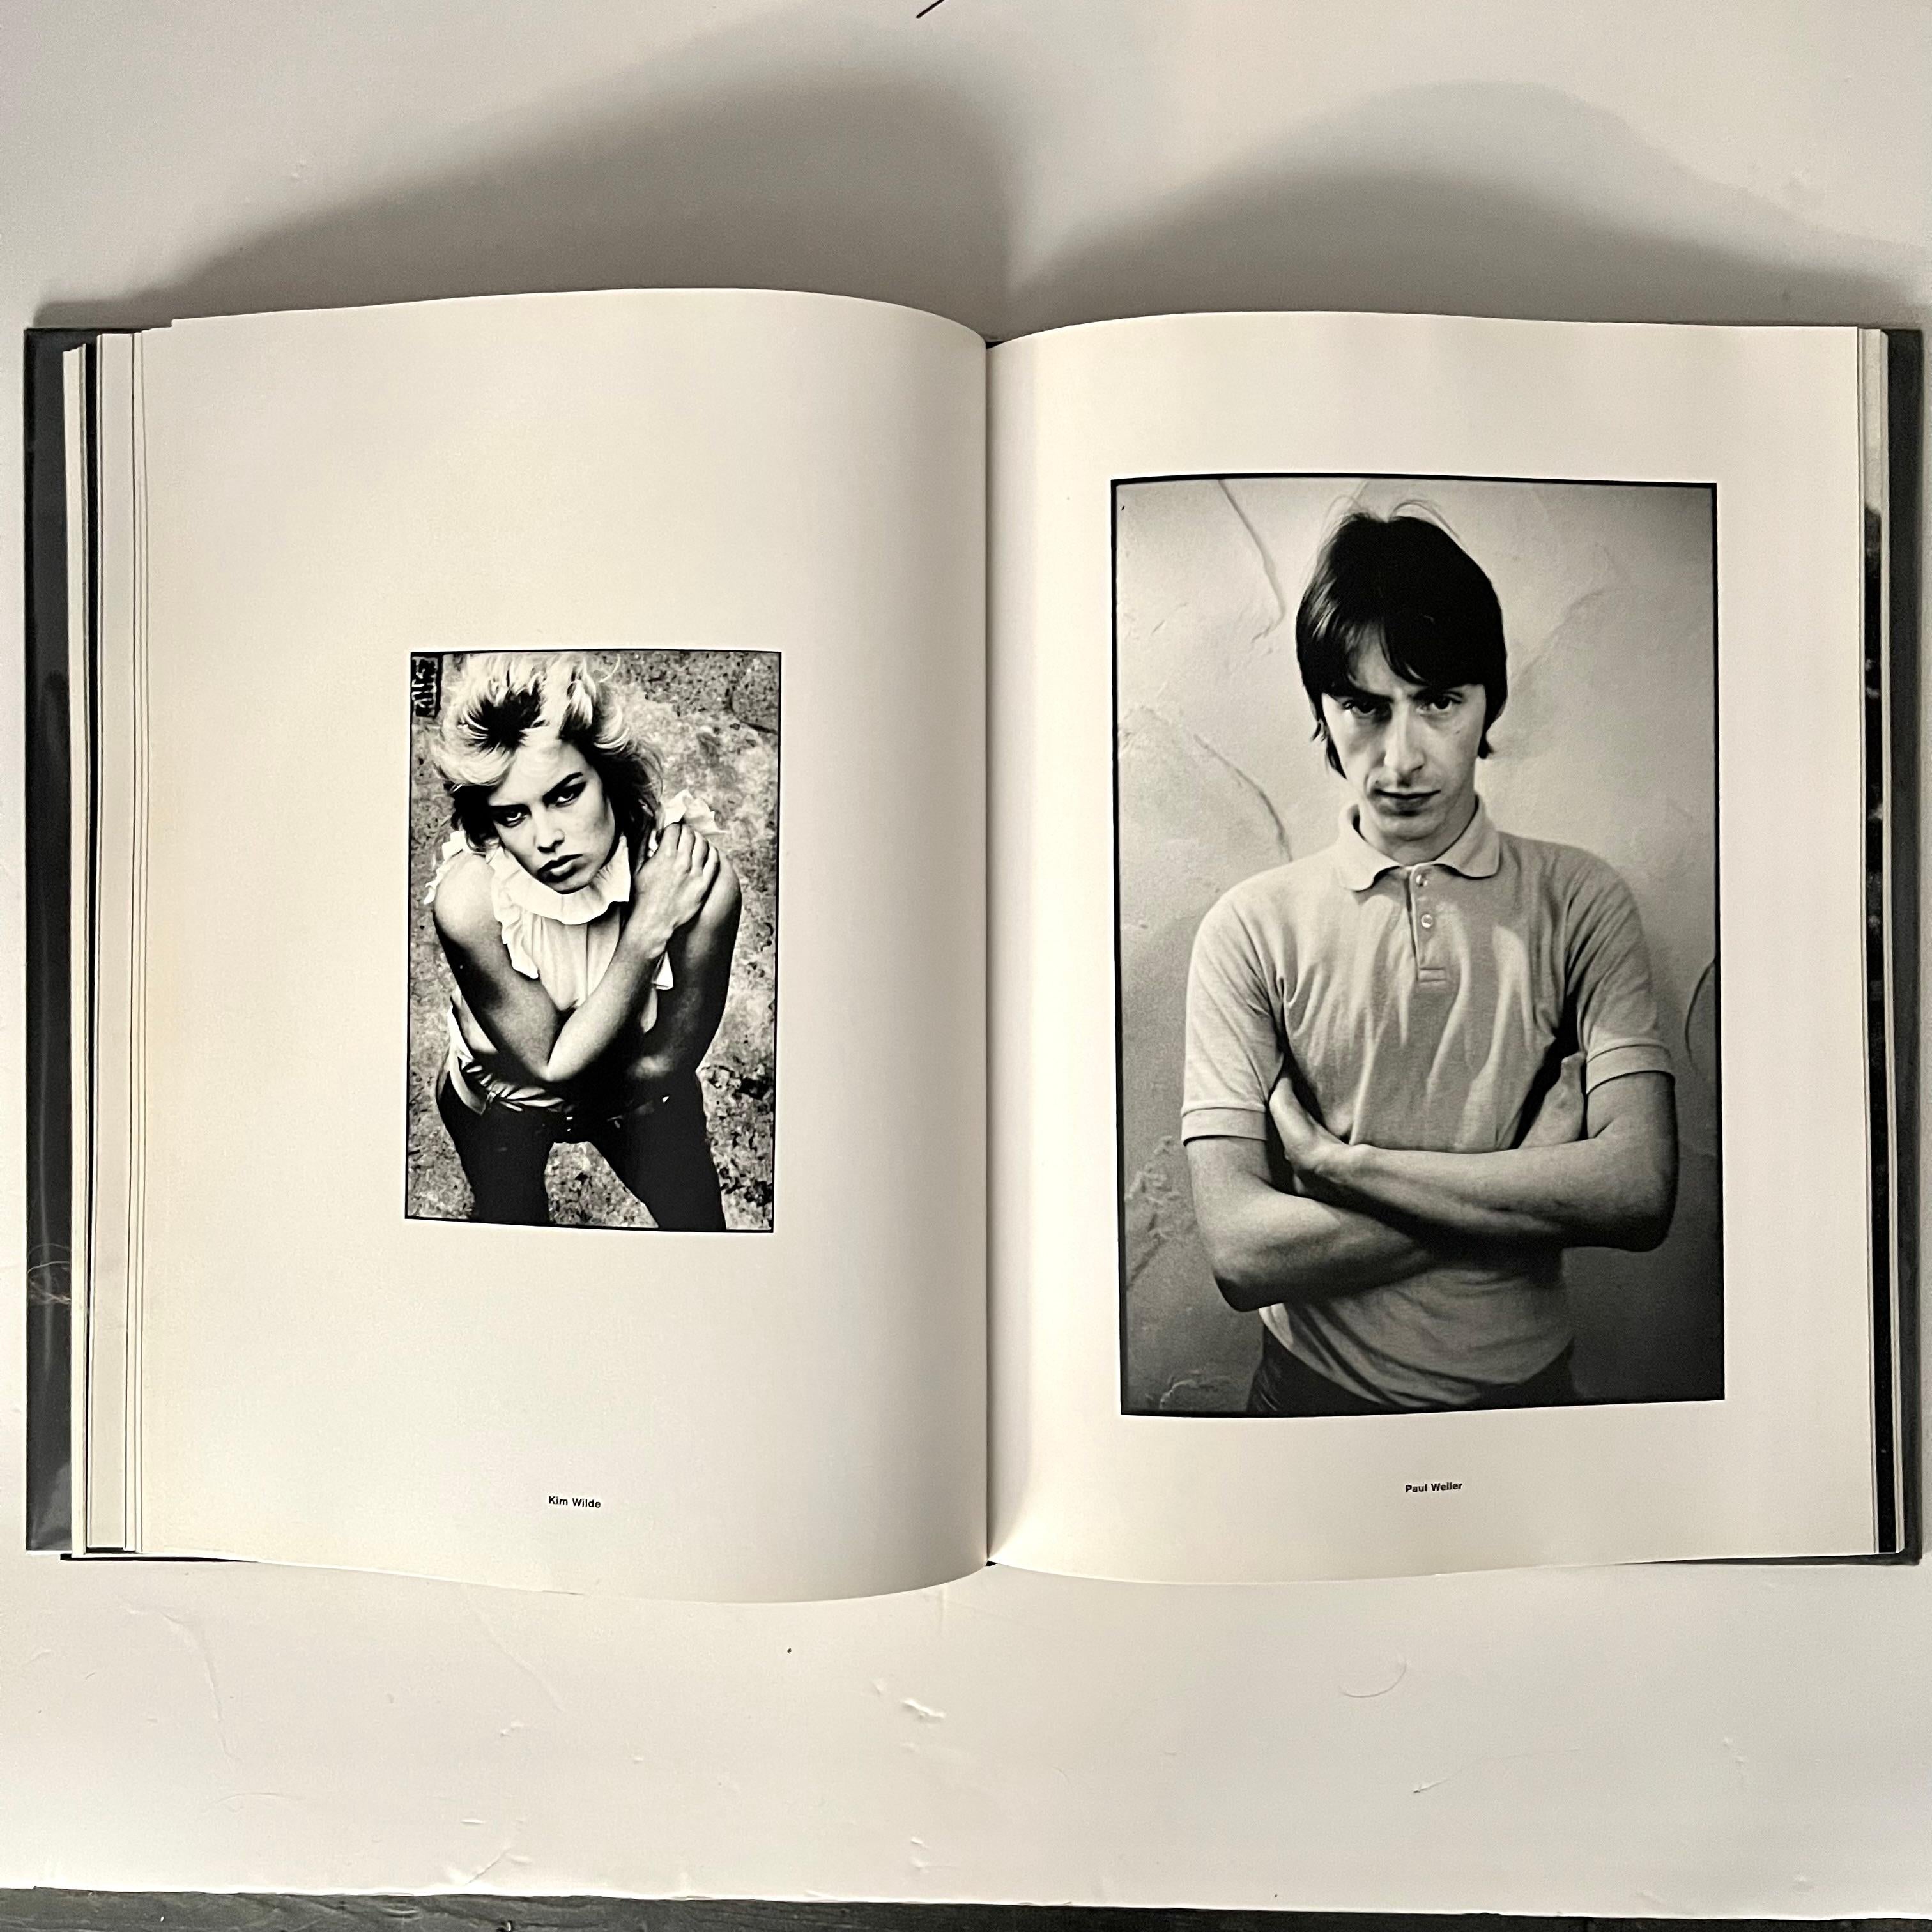 Published by Stewart Tabori & Chang, New York 1989 First American edition.  Hardback  -preface by Bono

Famouz established the reputation of Anton Corbijn as the photographer who redefined the genre of music photography.
With its over 100